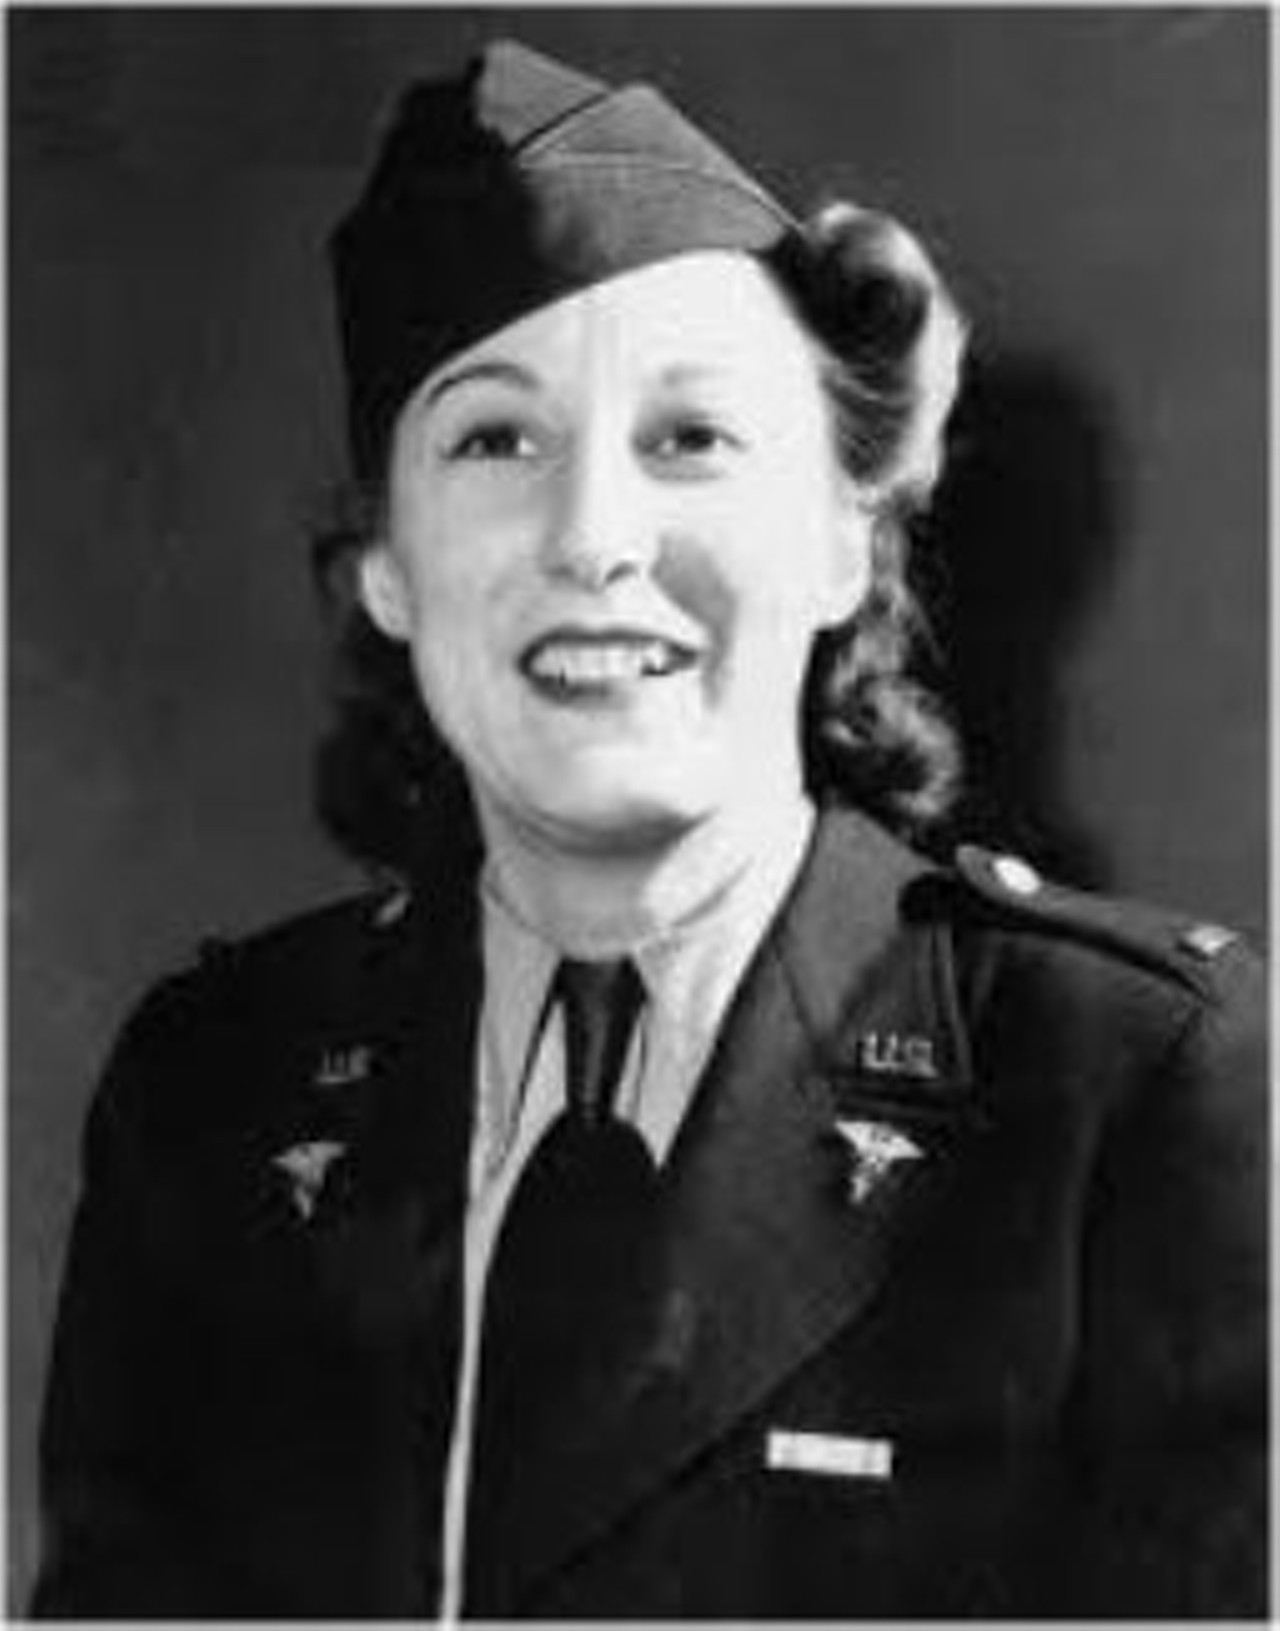 A Ft. Thomas native was the first woman to earn both a Purple Heart and Bronze Star
Cordelia E. Cook served in the U.S. Army during World War II and was the first woman to earn both a Bronze Star and a Purple Heart. Born on St. Patrick’s Day in 1919 in Ft. Thomas, Cook studied at The Christ Hospital School of Nursing. After graduating in 1940, Cook joined the U.S. Army Nurse Corps as a surgical nurse, where she earned the rank of first lieutenant. She was sent to Europe during World War II where she often found herself on the front lines in field hospitals. She was awarded a Bronze Star for her efforts and bravery working at a field hospital on the Italian front and was also given a Purple Star after she completed her hospital work while her field hospital was being shelled by German artillery and she was injured.